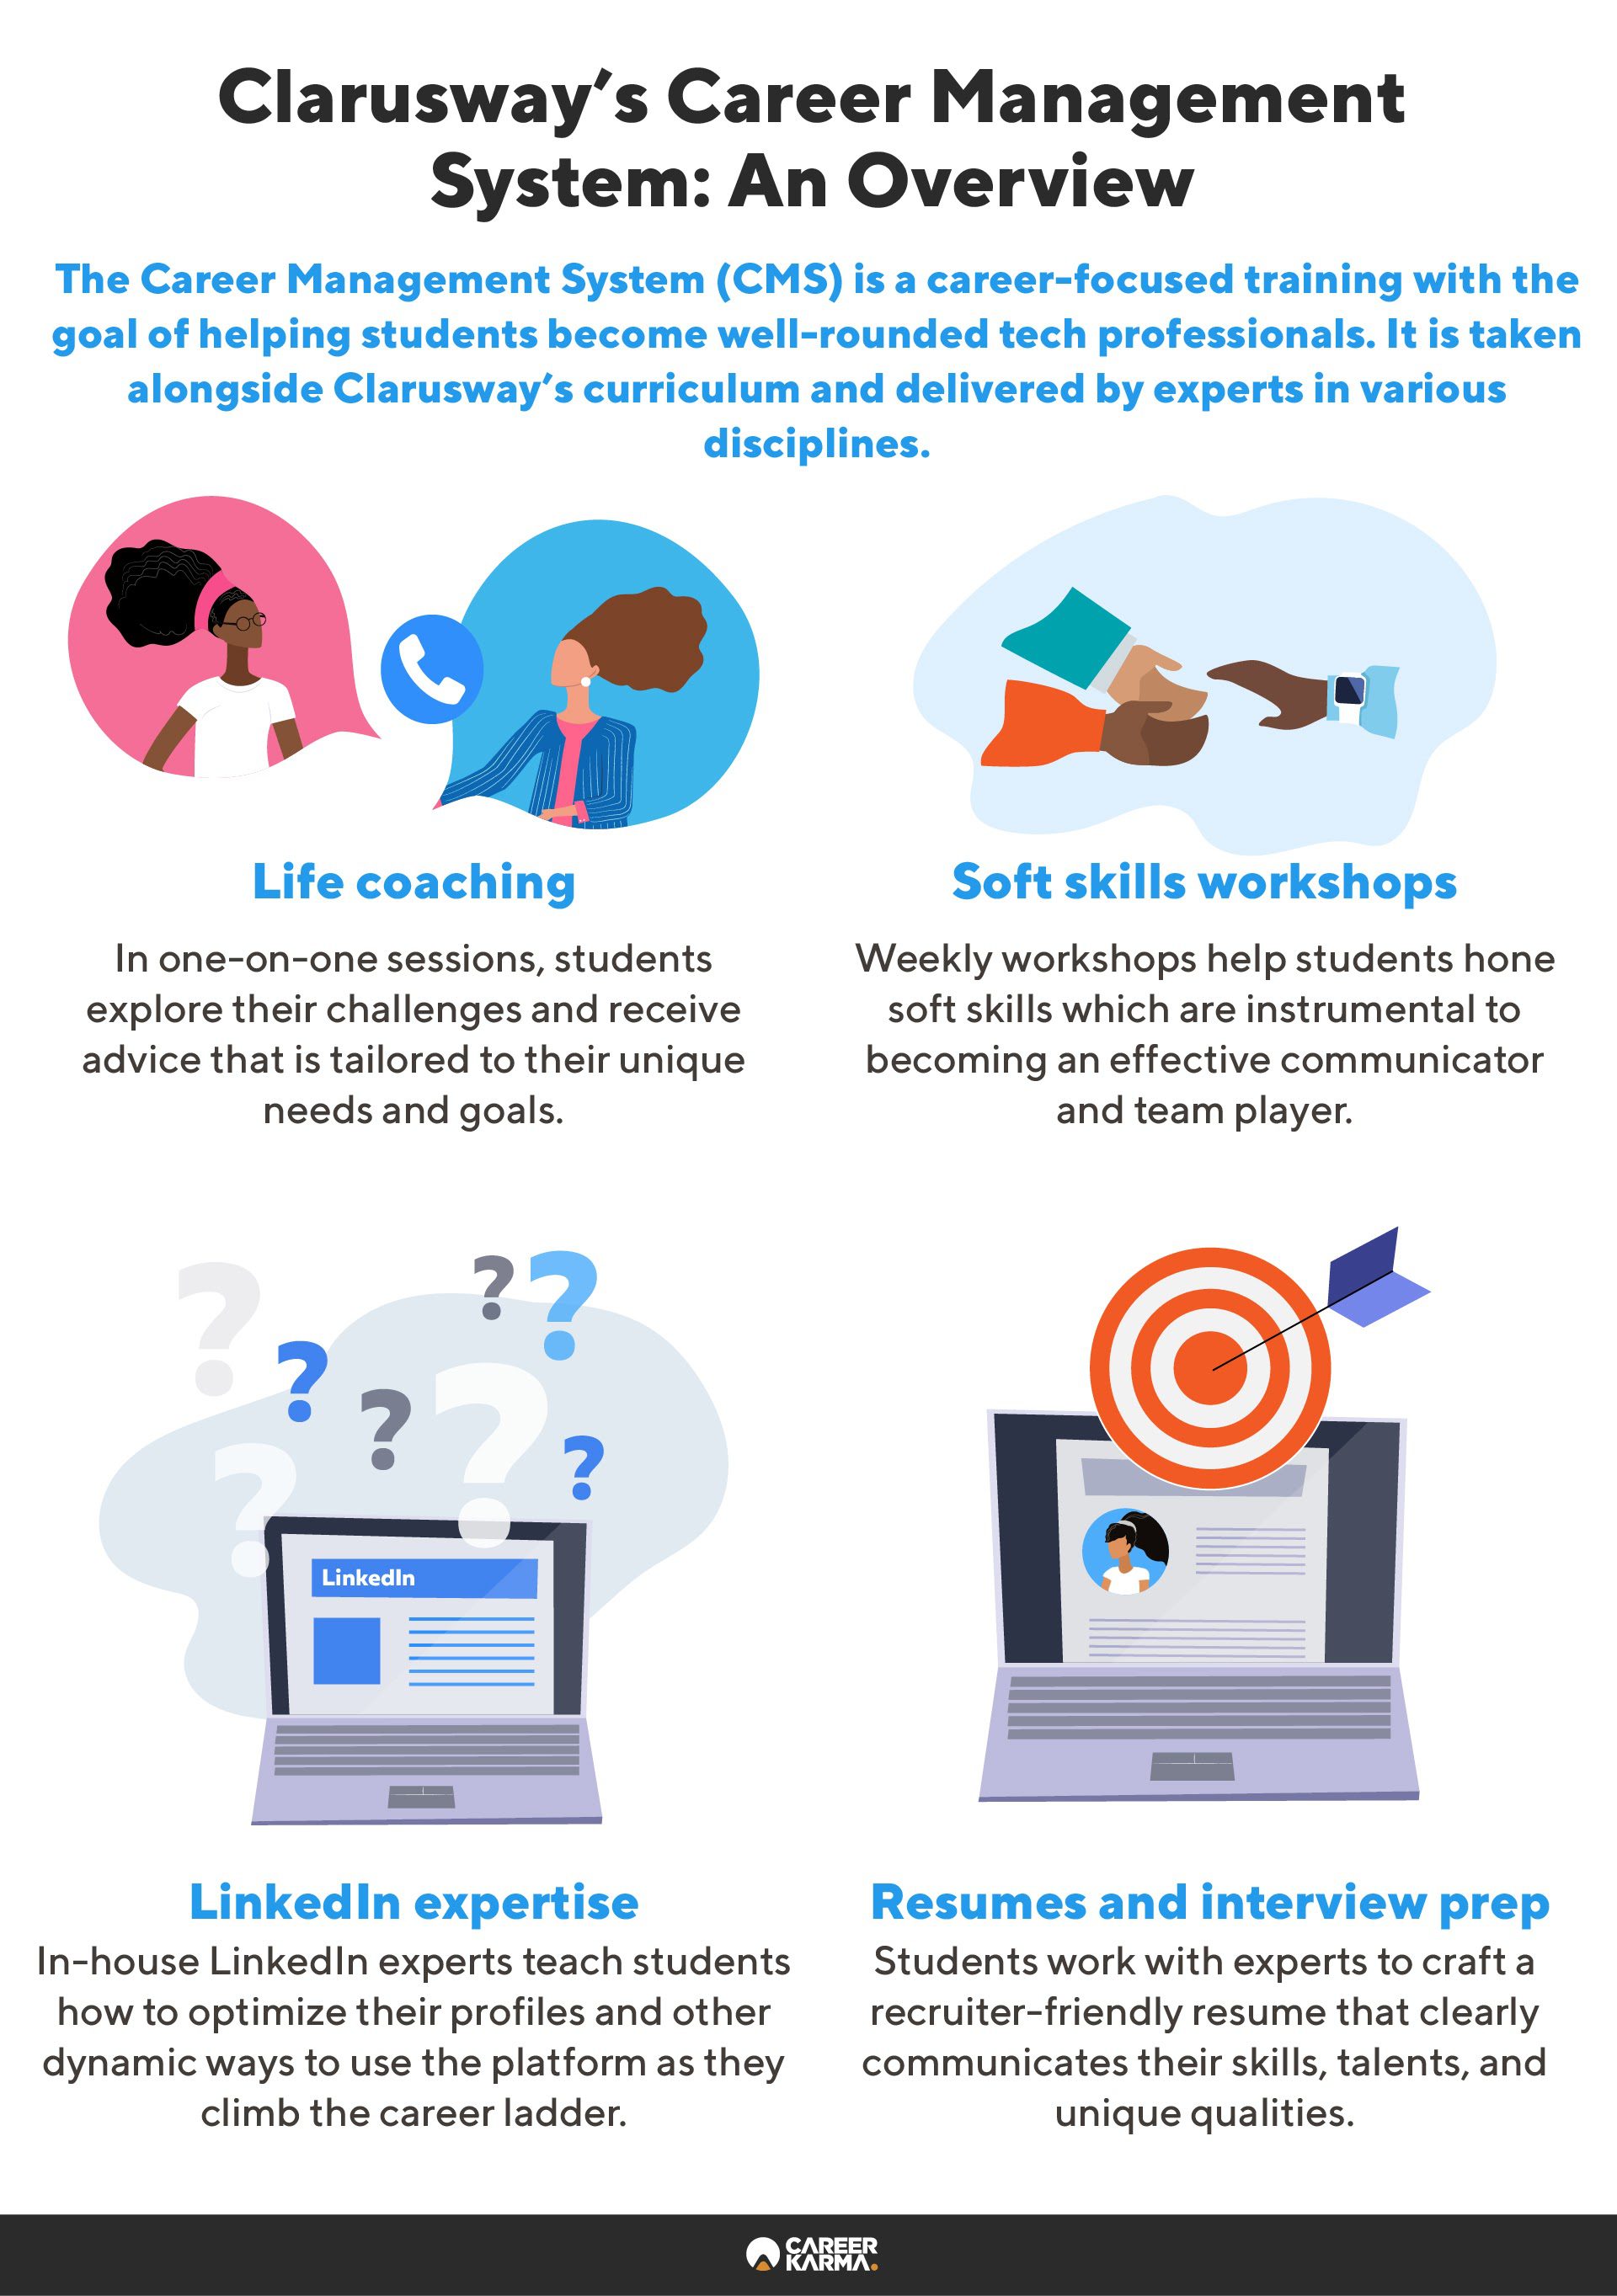 An infographic covering the key features of Clarusway’s Career Management Service